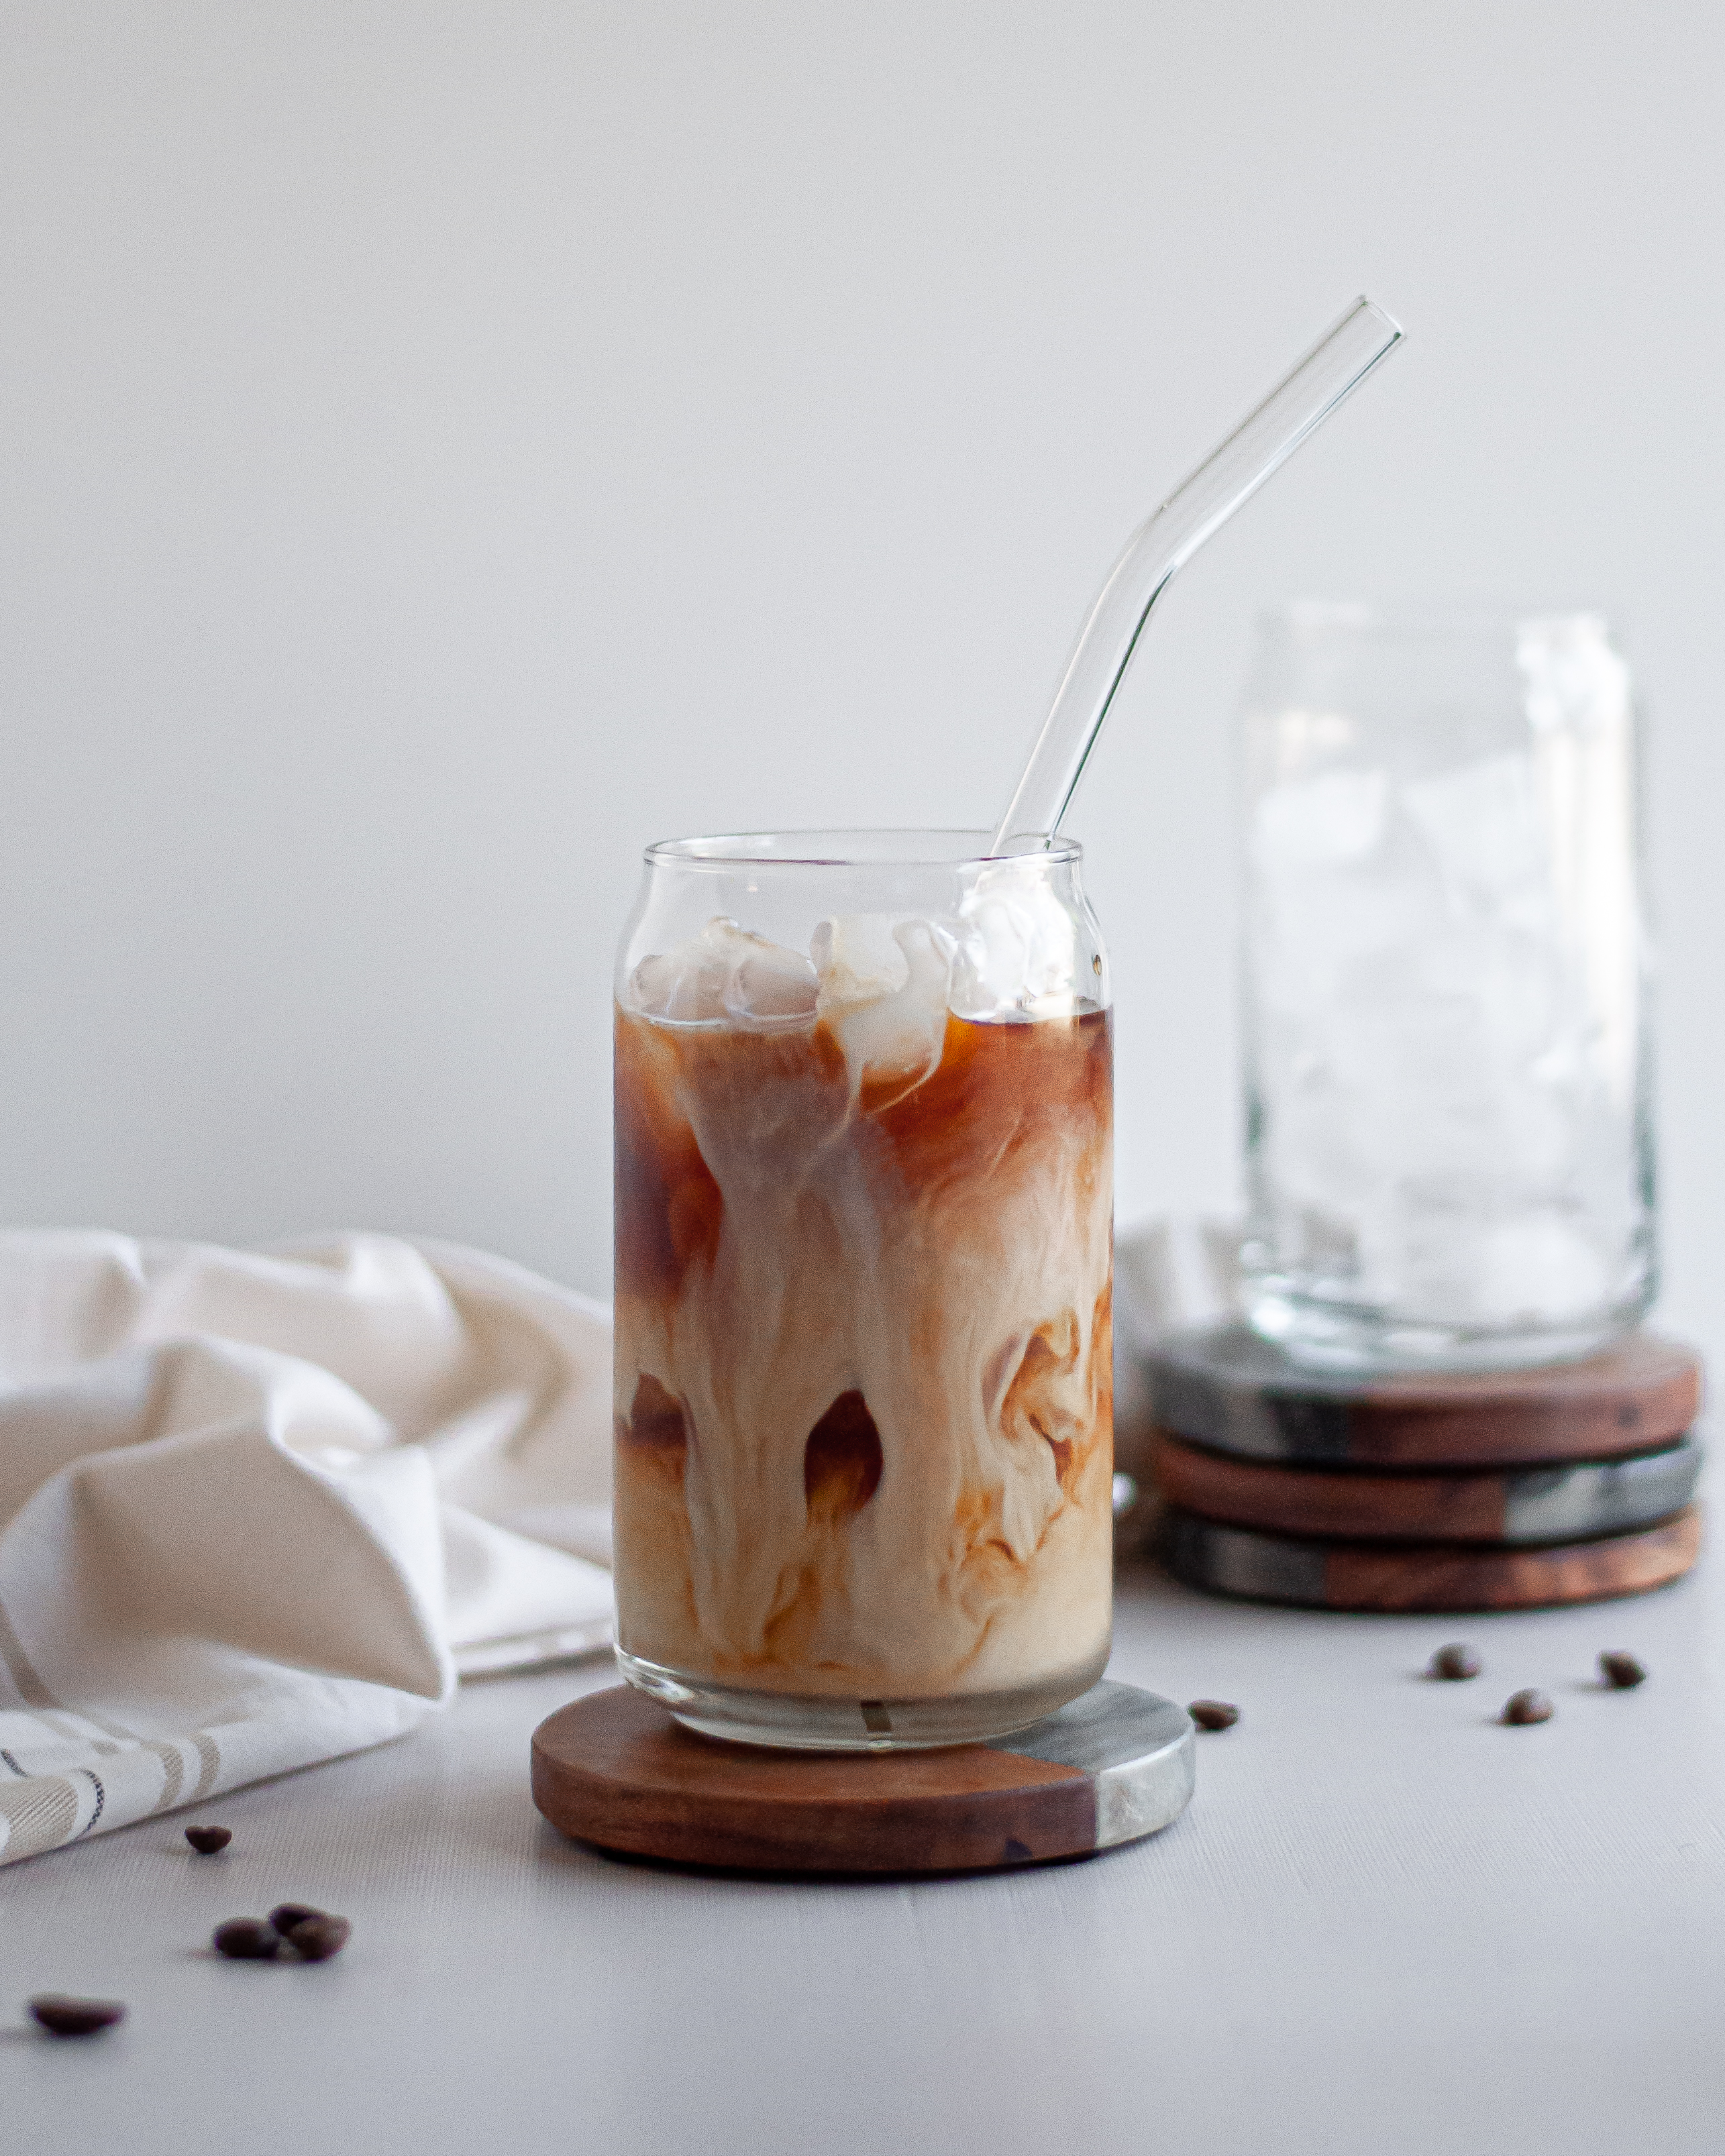 Homemade cold brew coffee served in a glass with a straw, with swirls of milk throughout